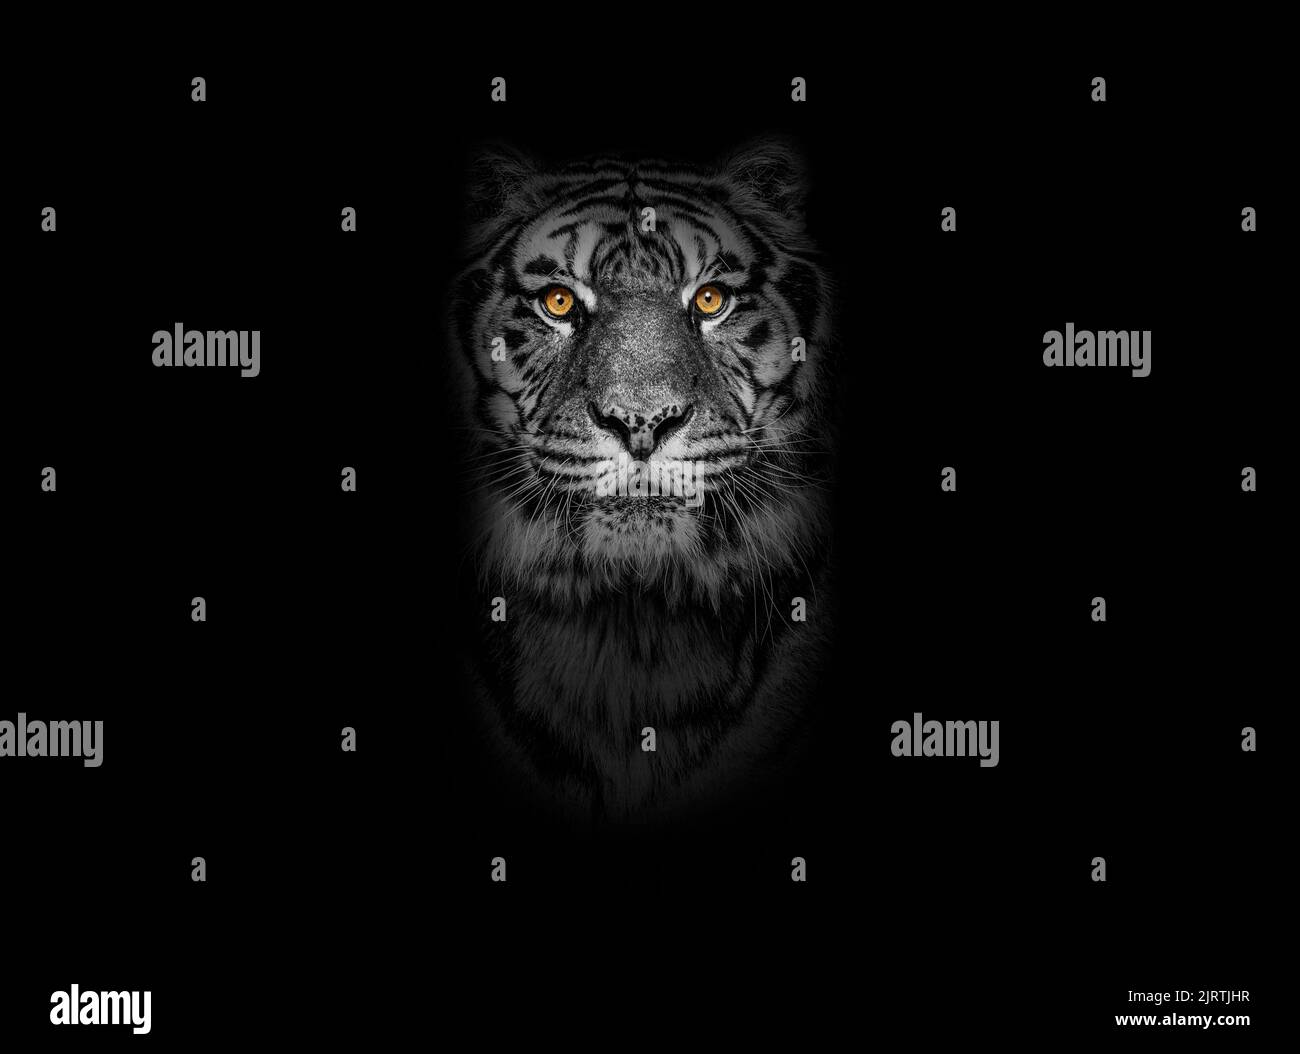 Black and white portrait of a Tiger looking at the camera on black background, yellow eyed Stock Photo